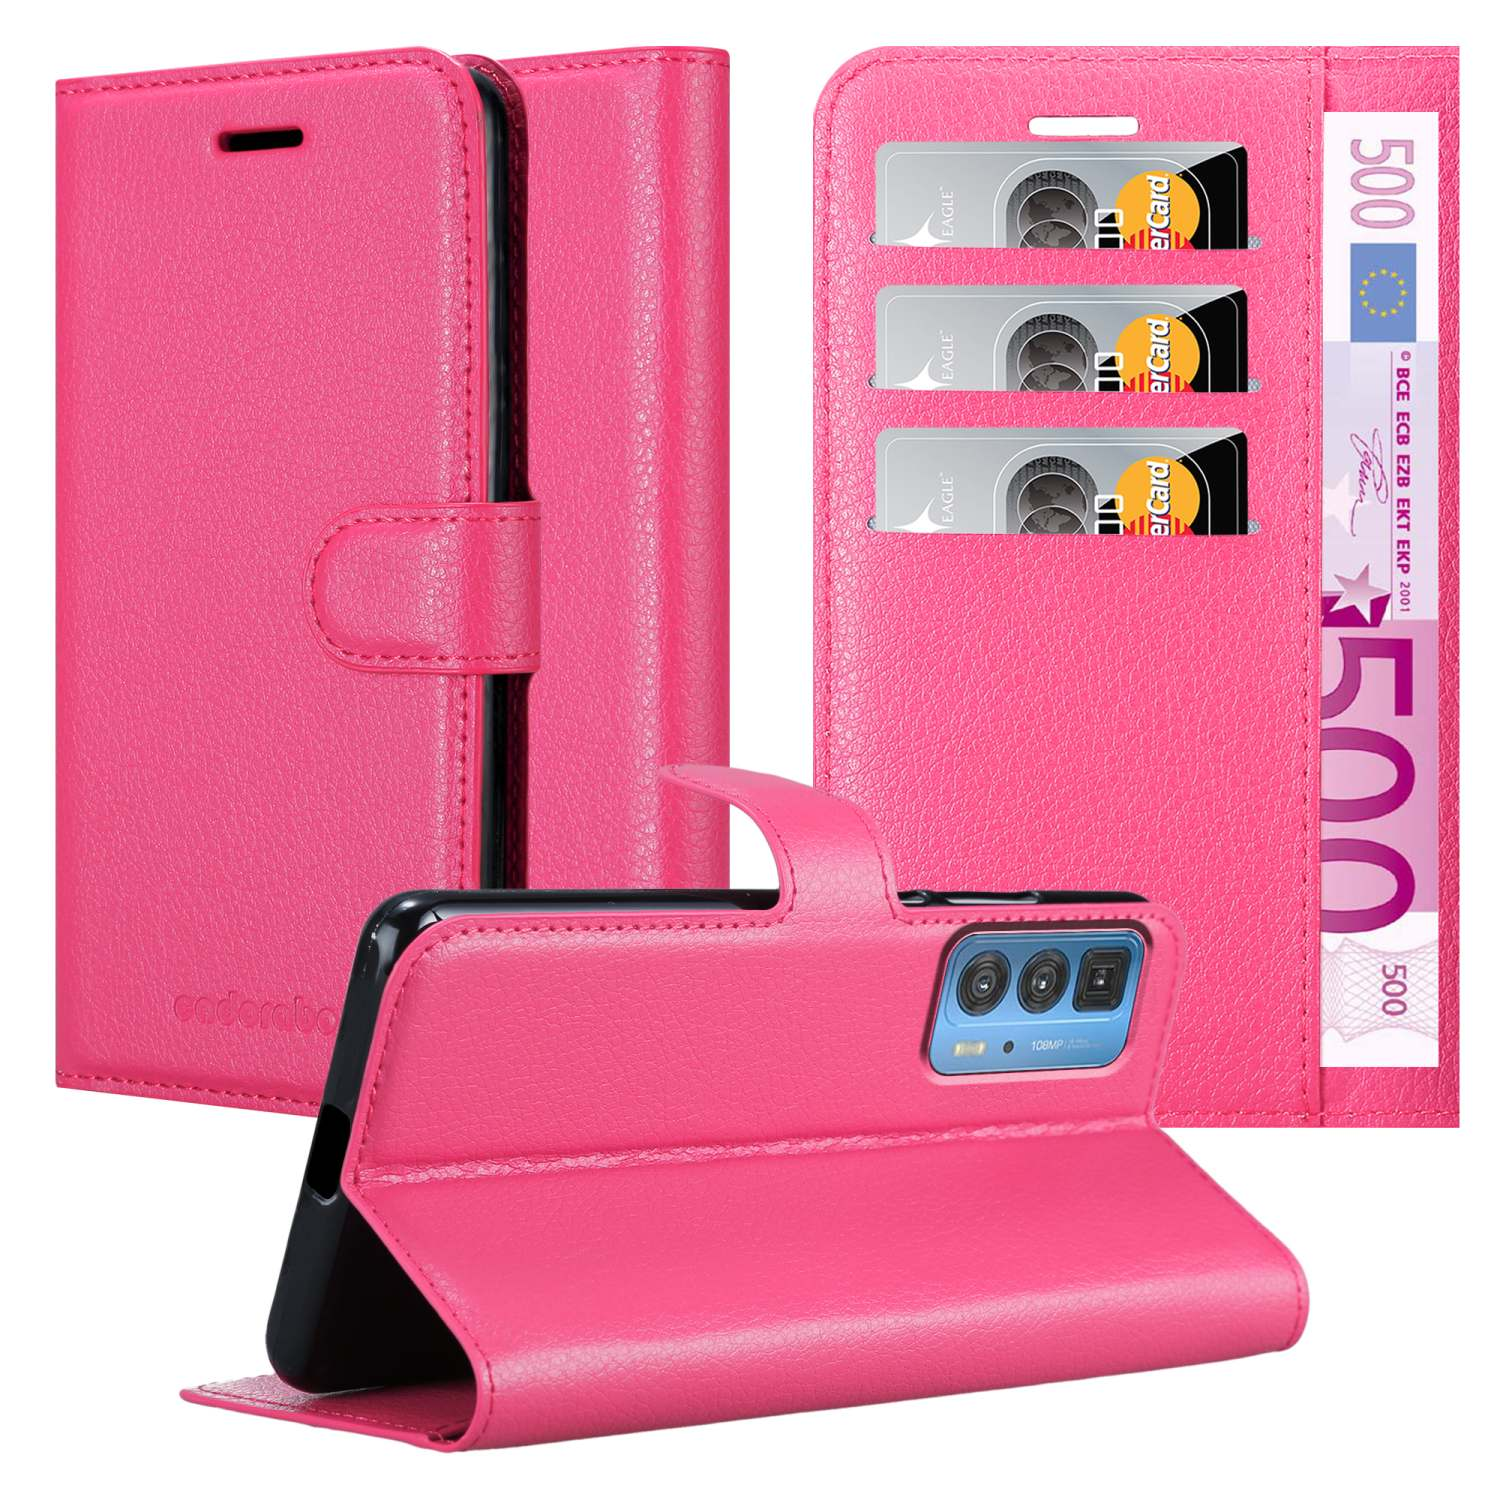 CHERRY PRO, S / Book CADORABO PINK Standfunktion, Hülle PRO Bookcover, EDGE 20 EDGE Motorola,